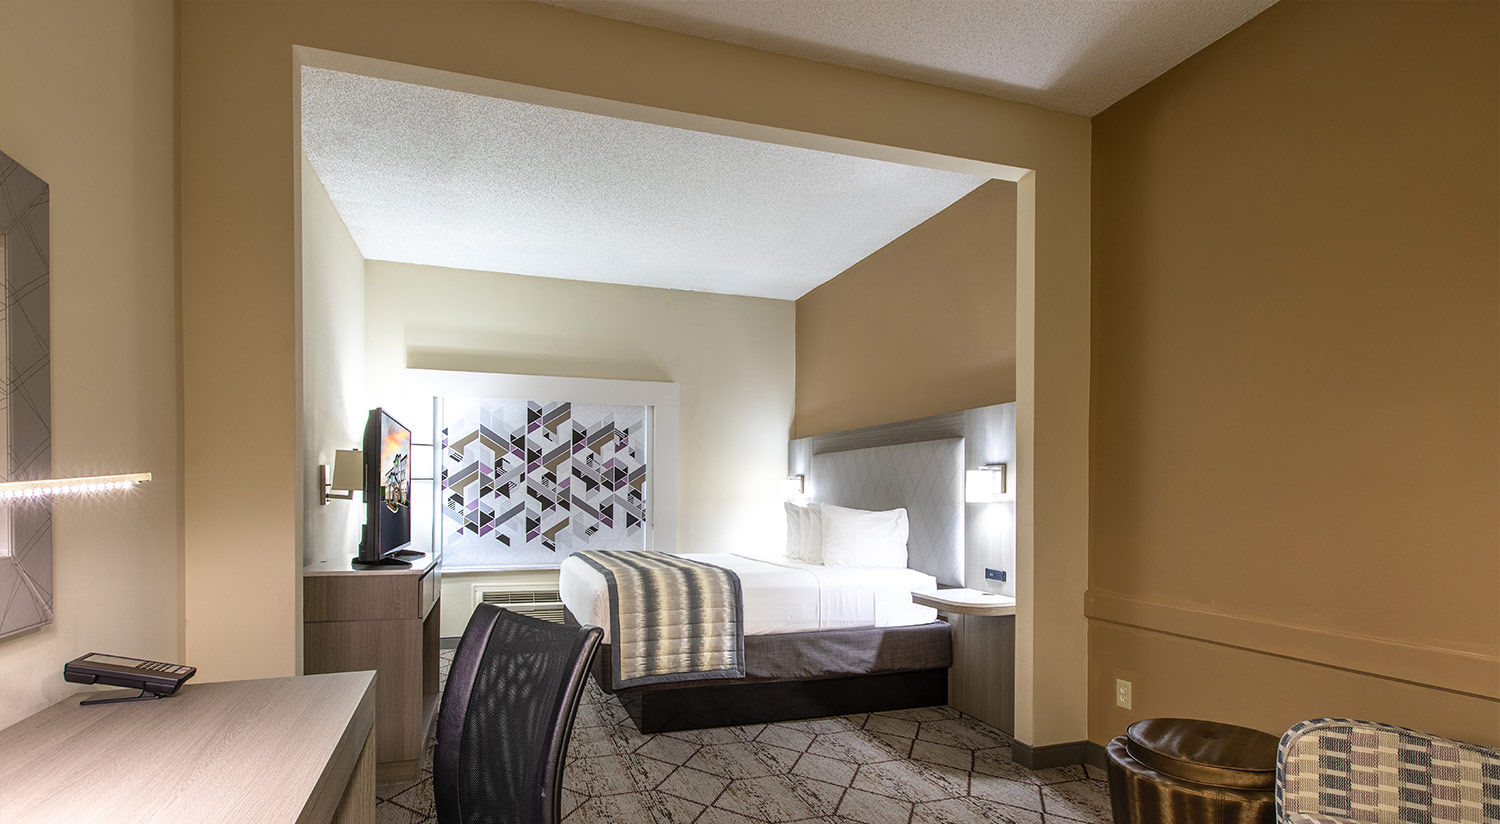 OUR ELEGANT CHARLOTTE, NC GUEST ROOMS & SUITES ARE IDEAL FOR  BUSINESS & LEISURE TRAVEL